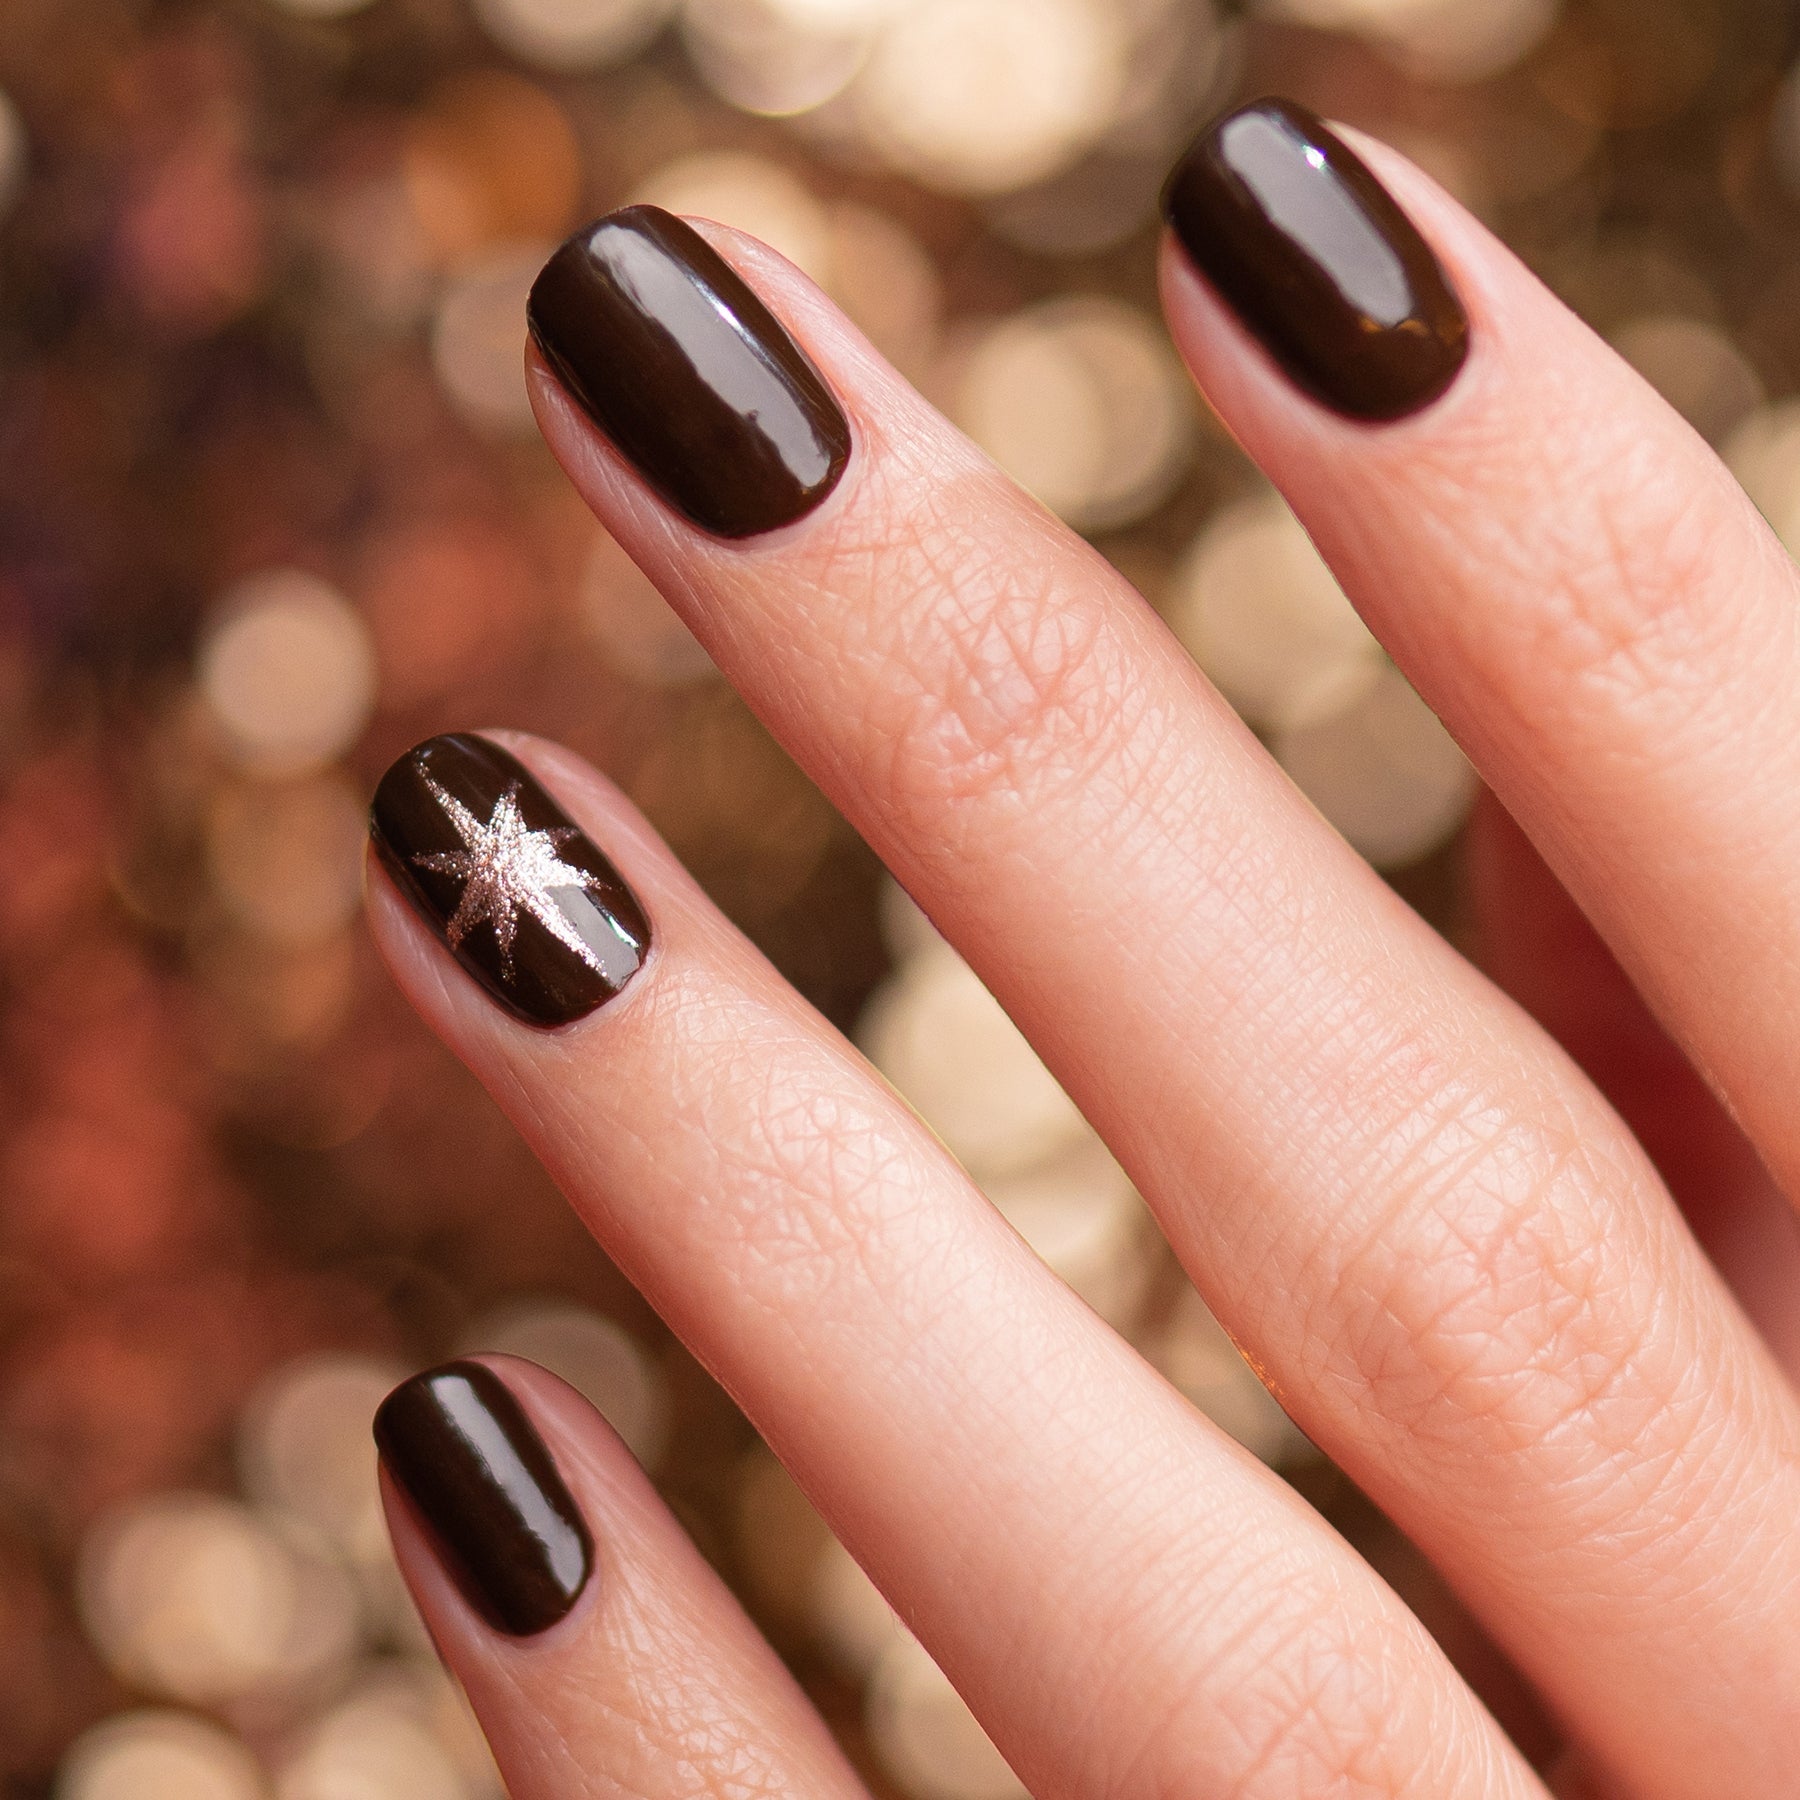 Southbury Plaza - 🍁 The Biggest Trending nail polish Color for Fall? It's  all about BROWNS this season! Dark and milk chocolate, mahogany, caramel,  eggplant, espresso….. With hues from light to dark